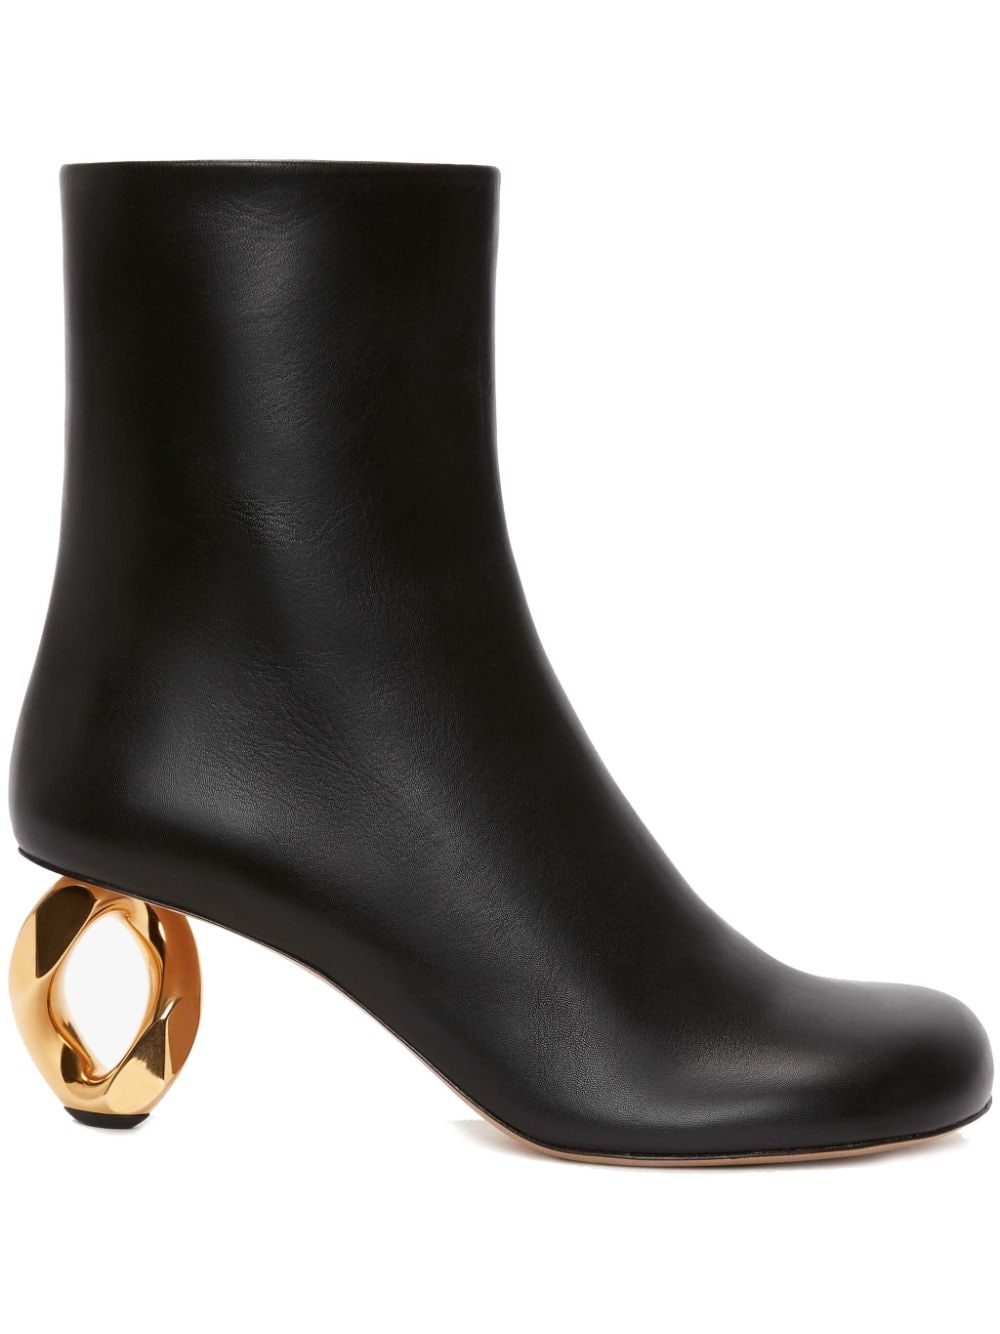 JW Anderson Chain-heel leather ankle boots - Black von JW Anderson